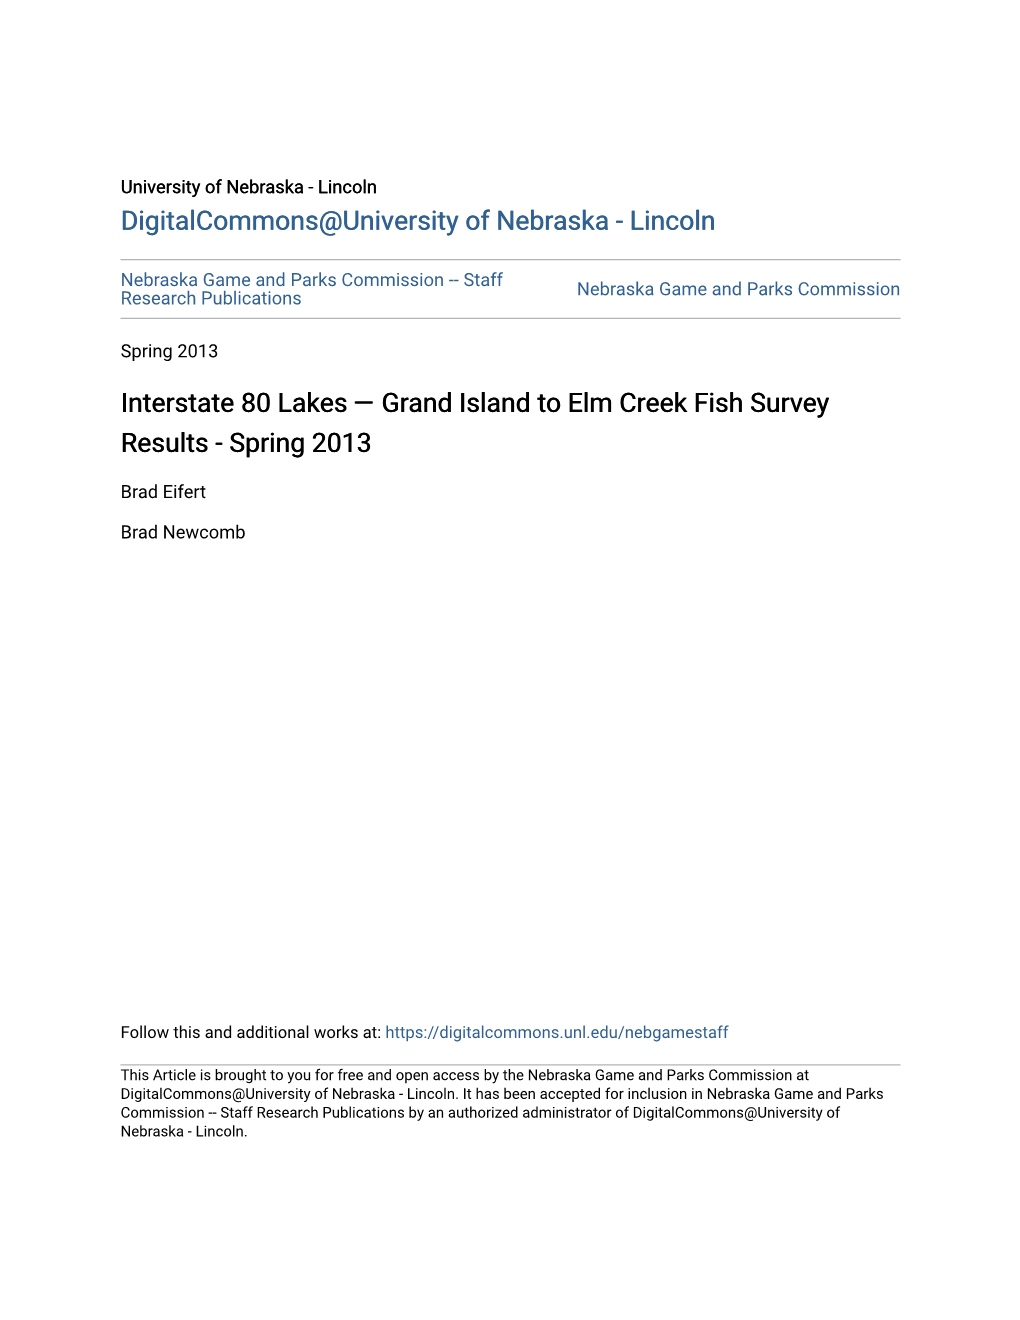 Interstate 80 Lakes — Grand Island to Elm Creek Fish Survey Results - Spring 2013